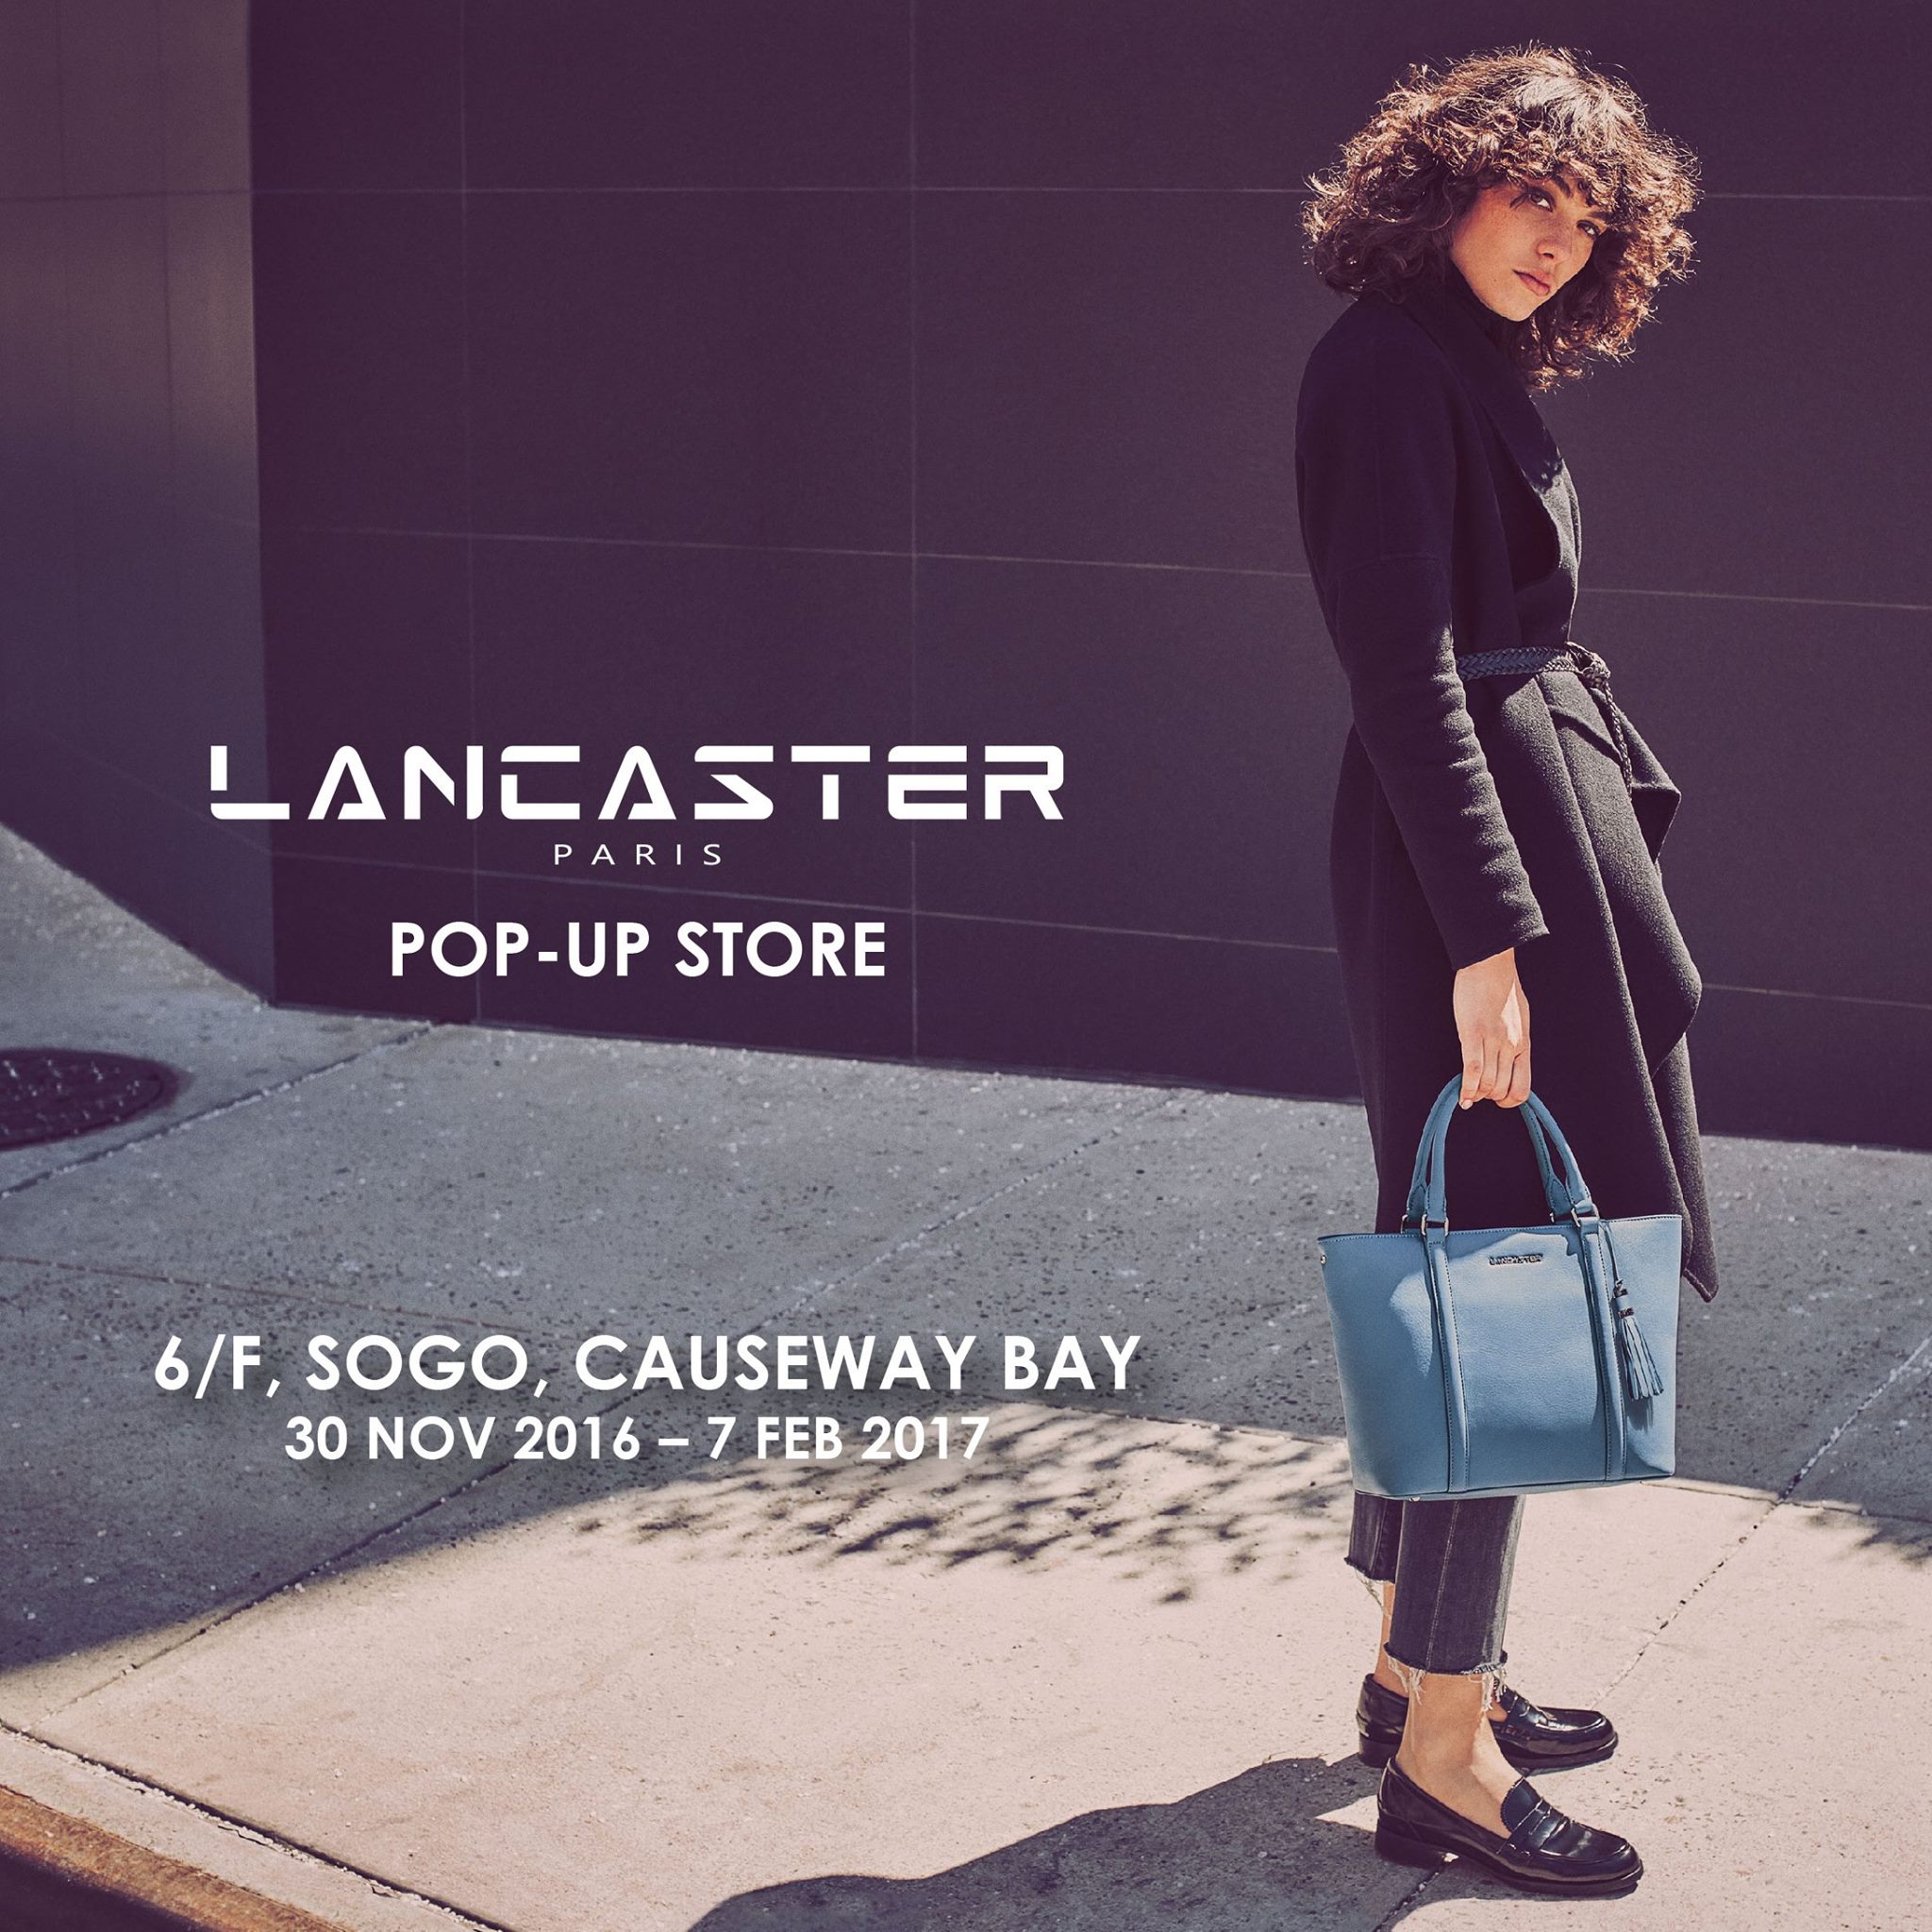 Come and visit the new LANCASTER Pop-up store at SOGO Causeway Bay!